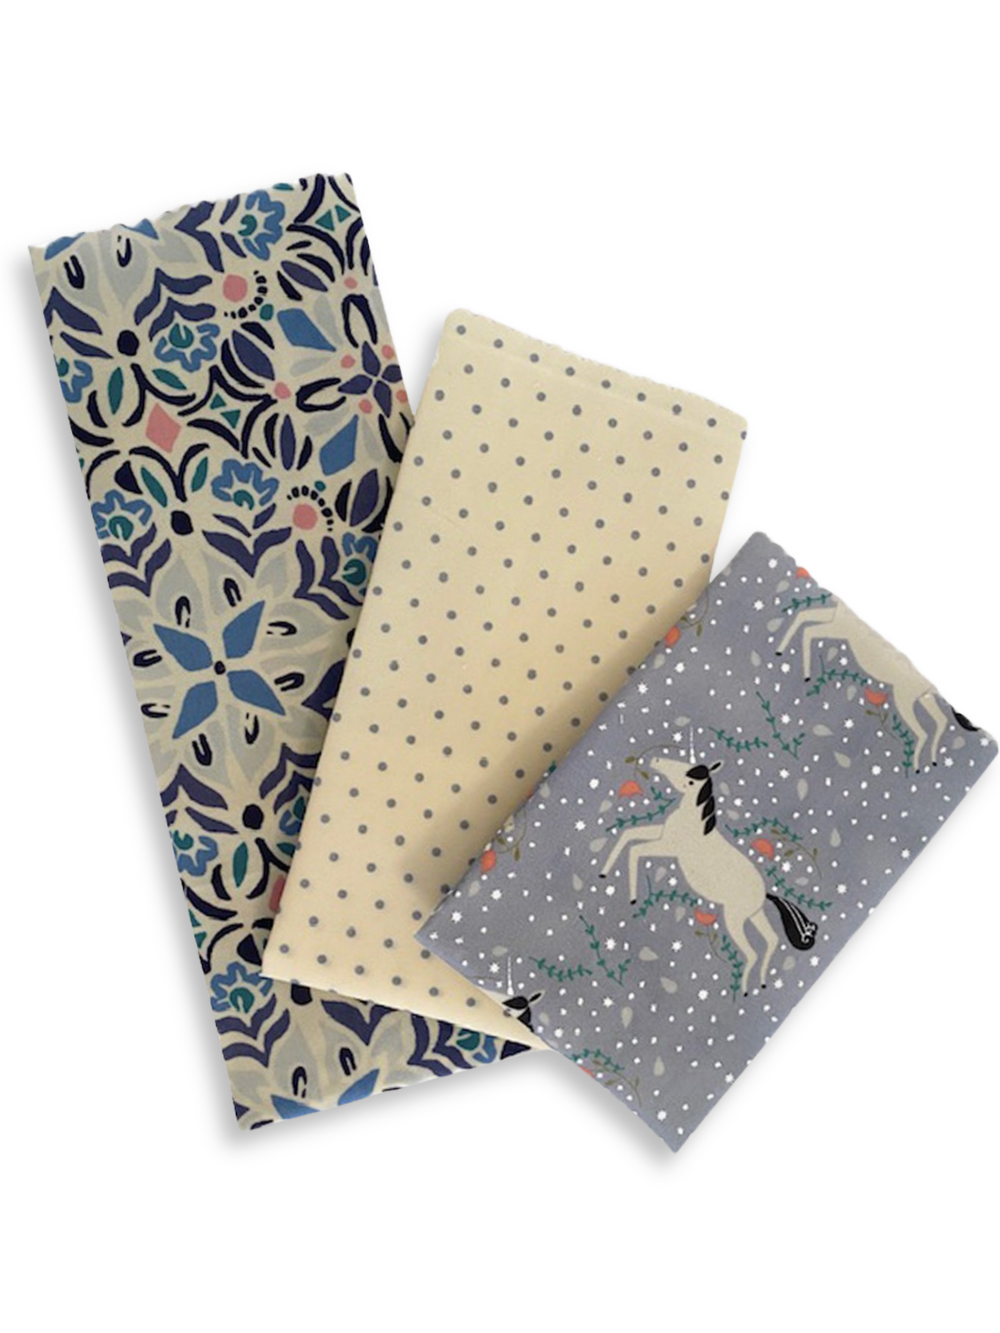 Good Soul Shop Beeswax Wrap Set of 3 Purple Unicorn & Polka dots Fanned Out